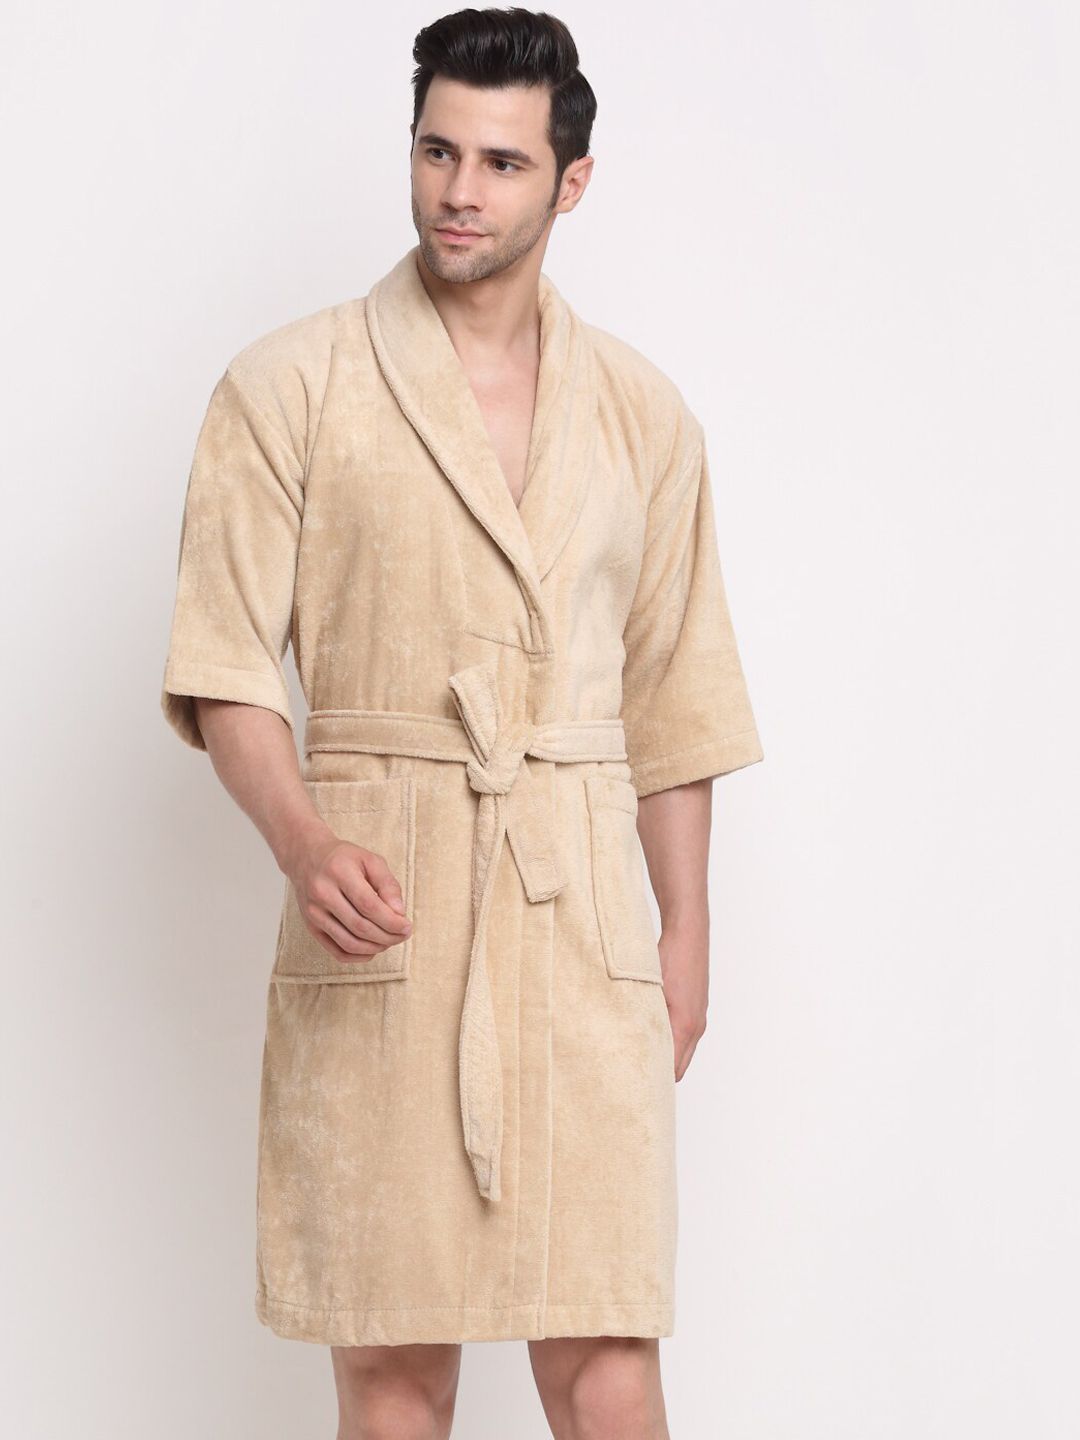 Trident Cream-Coloured Solid Bath Robe With Belt Price in India